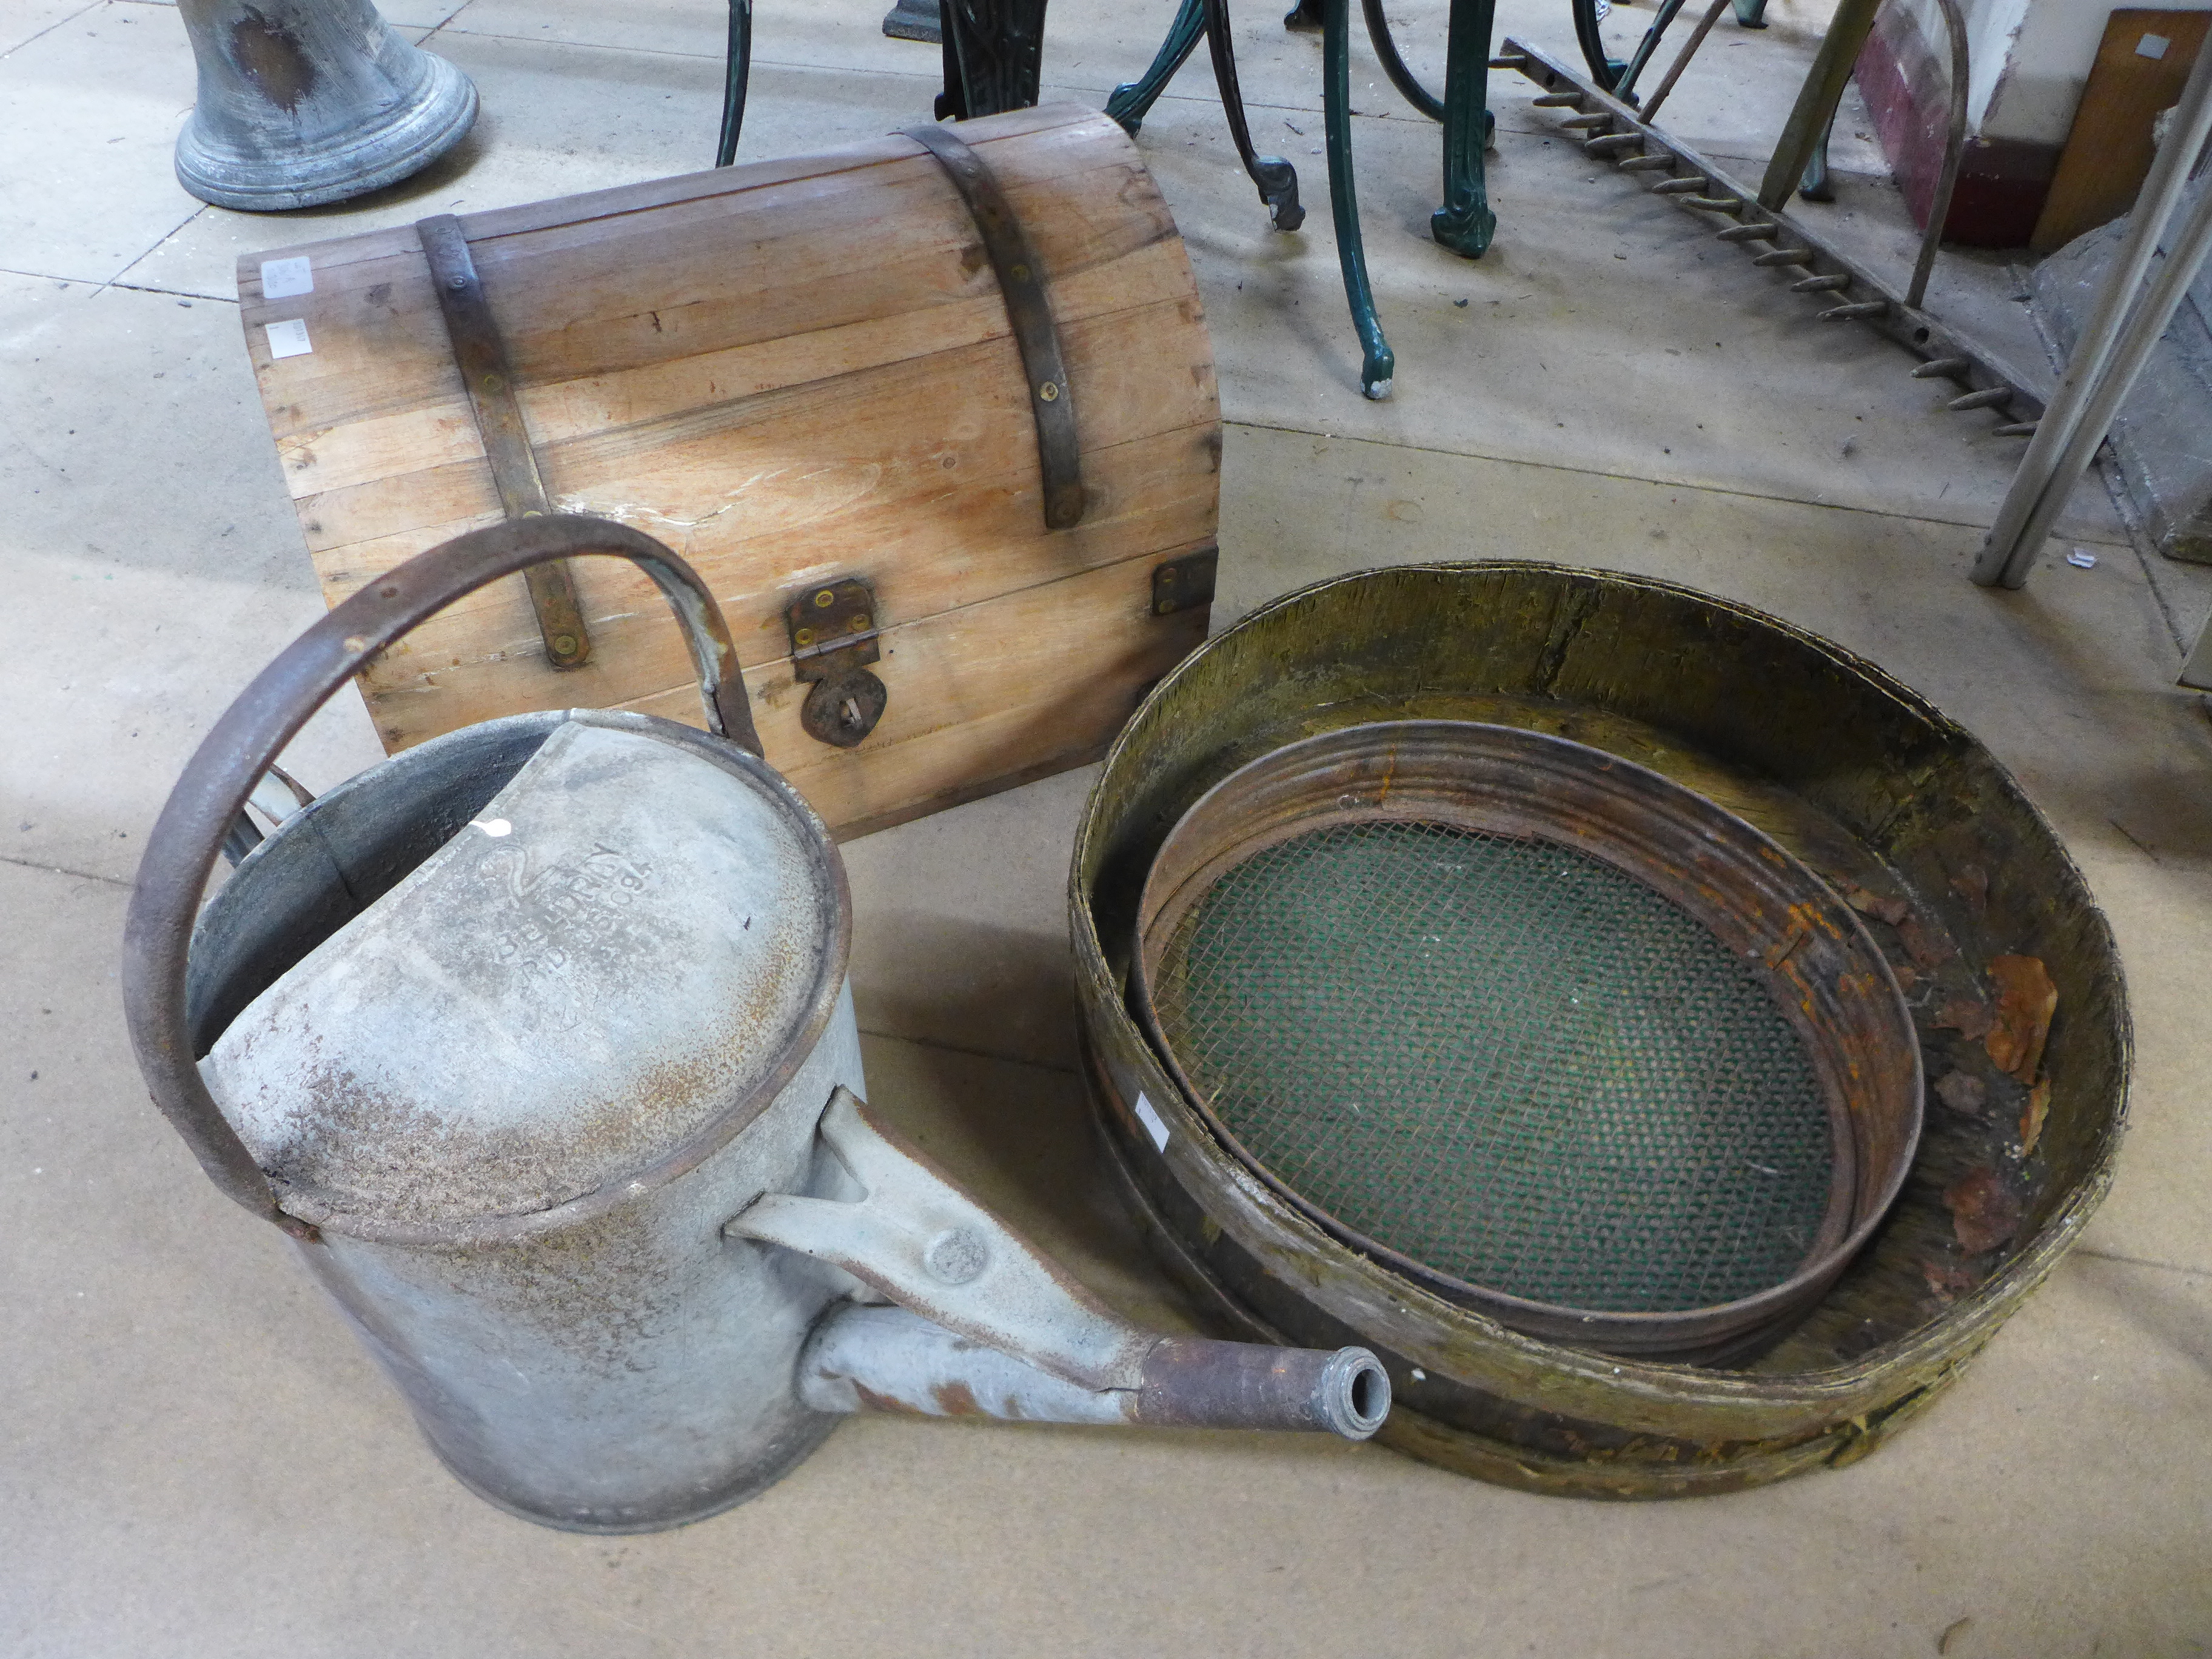 A dome top trunk, galvanised watering can, two sieves, etc.